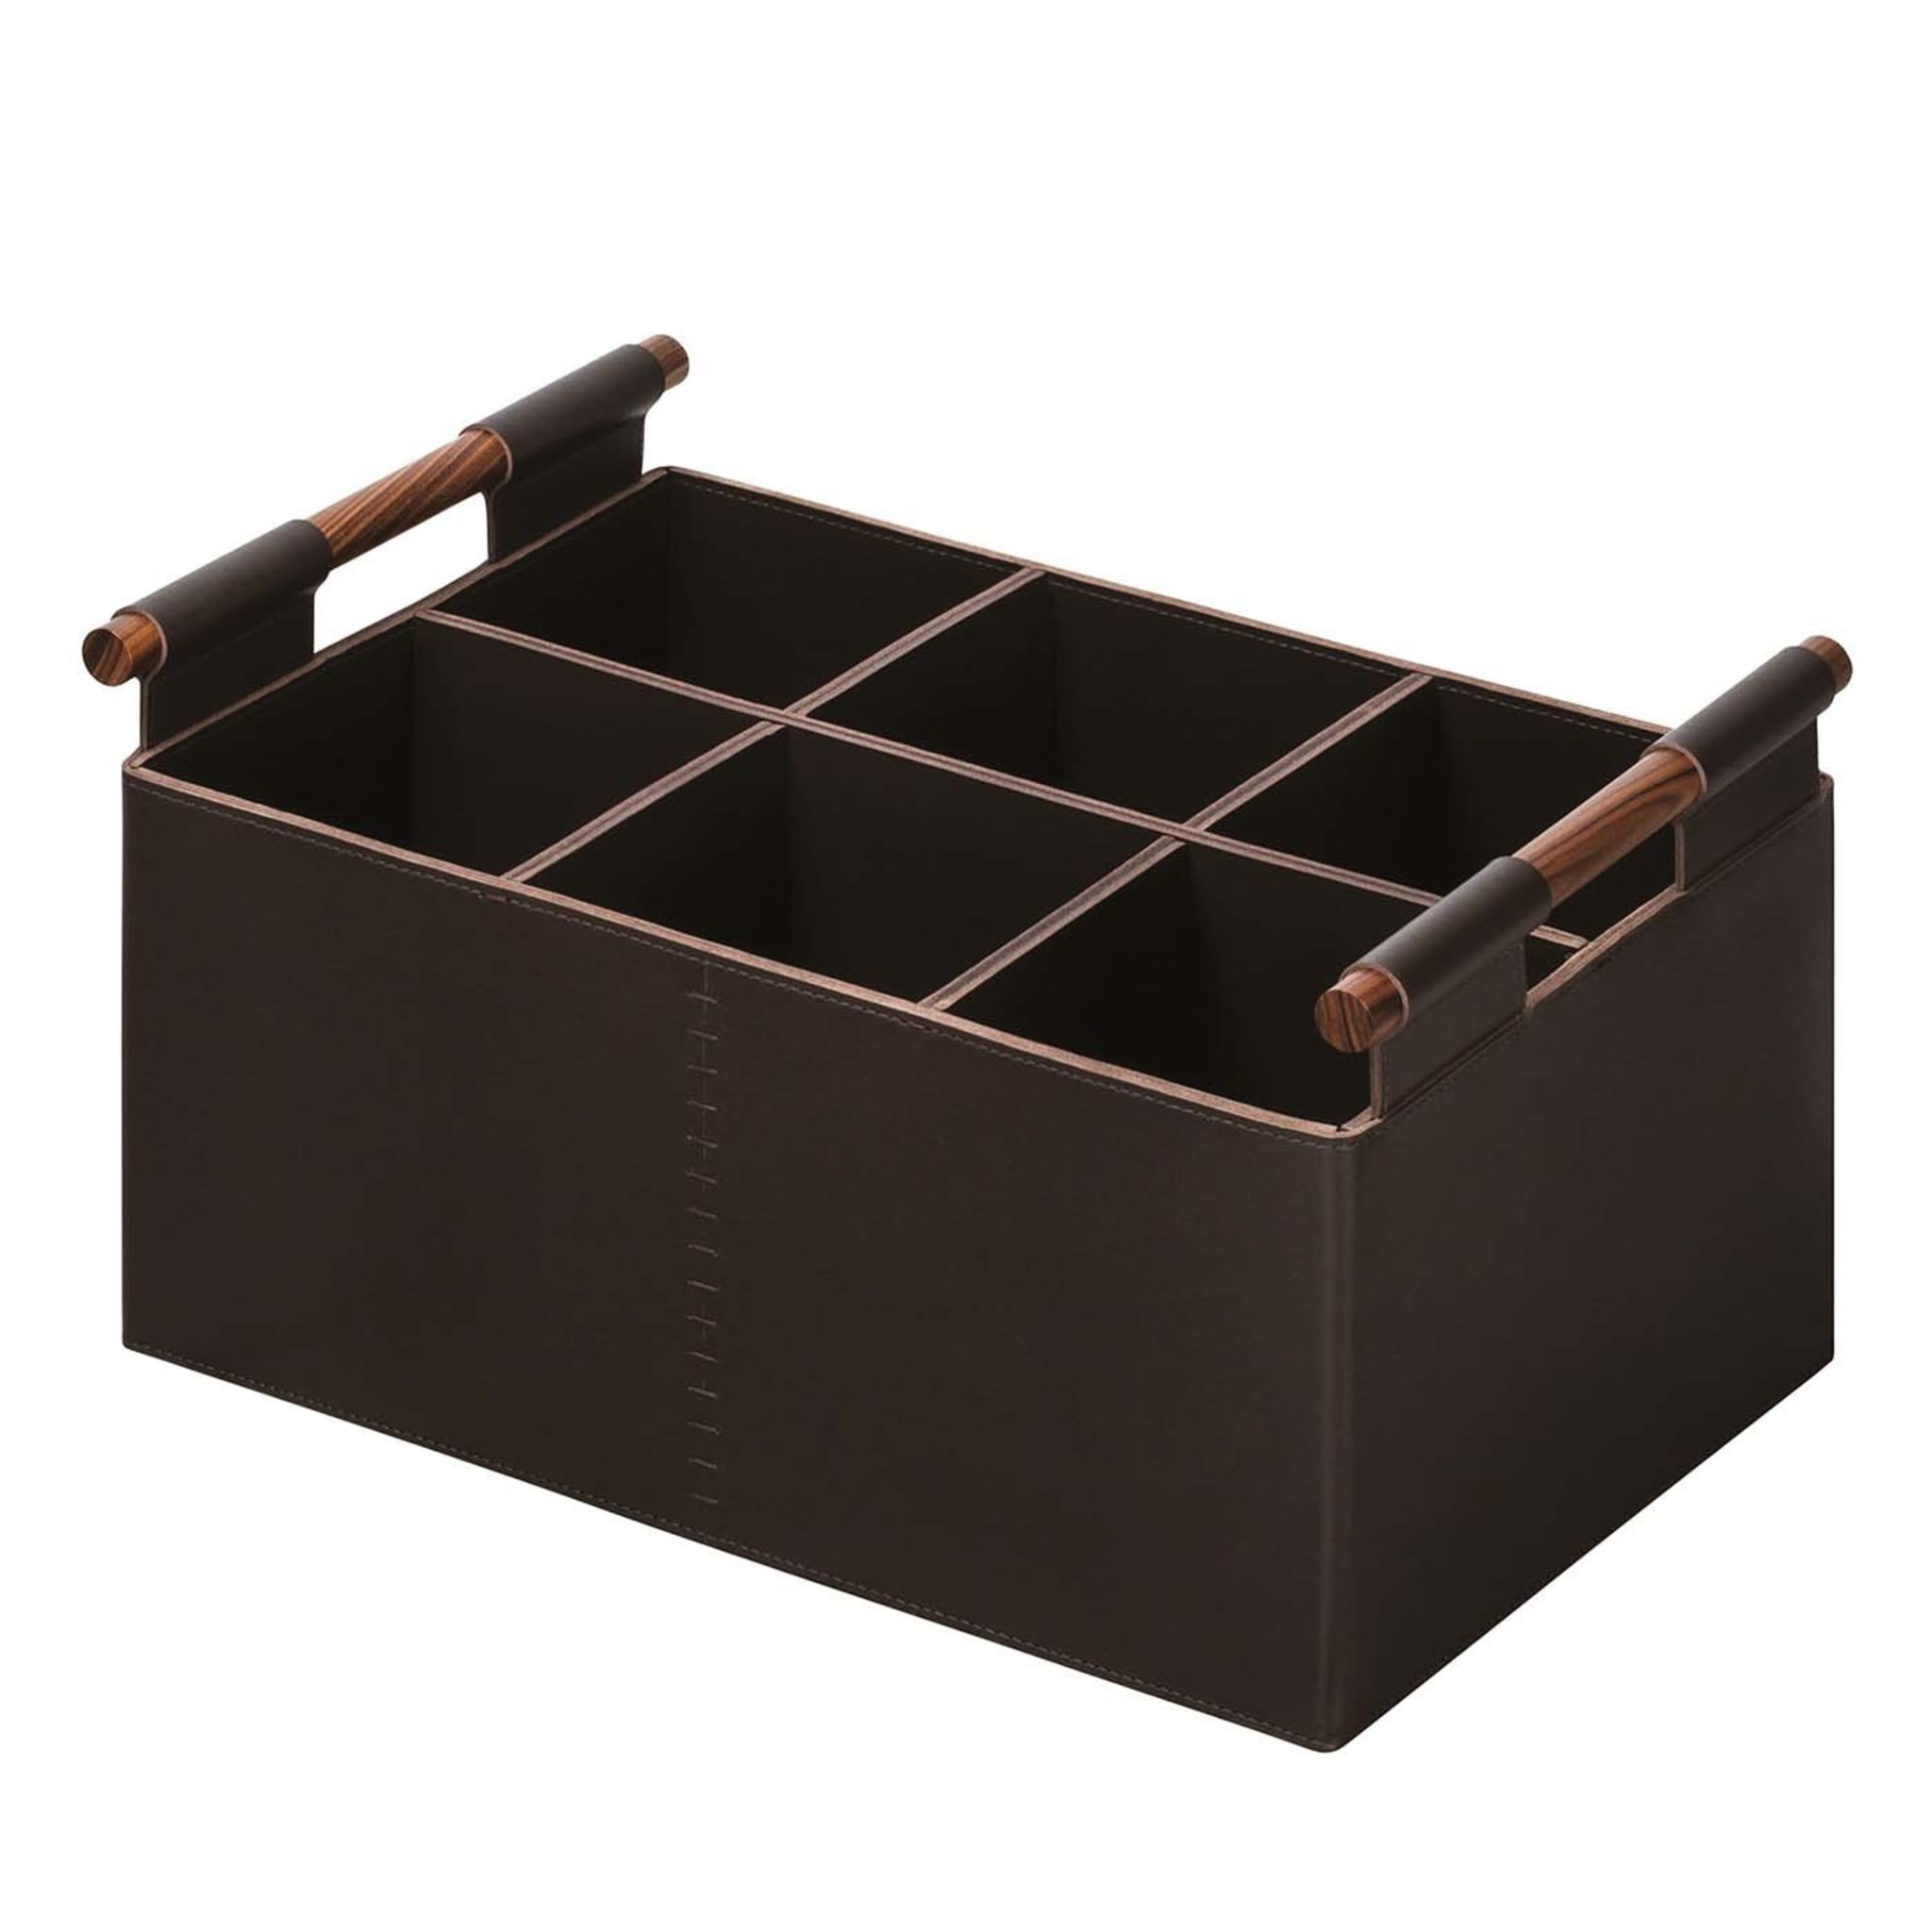 Beta Rectangular Basket with Handles in Brown Leather - Main view